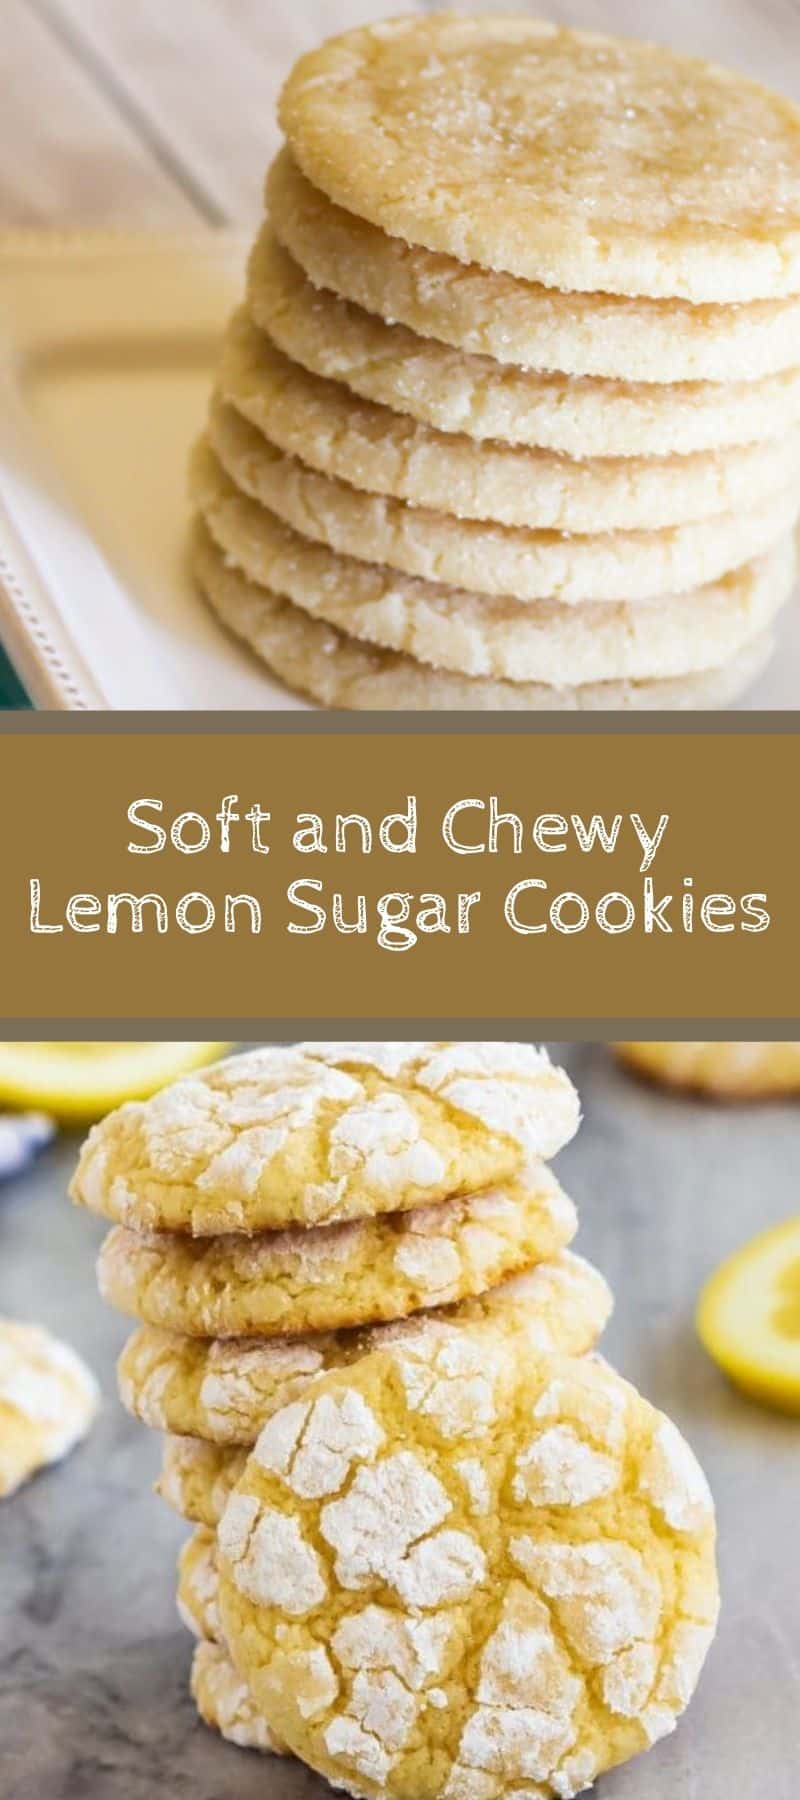 Soft and Chewy Lemon Sugar Cookies 3